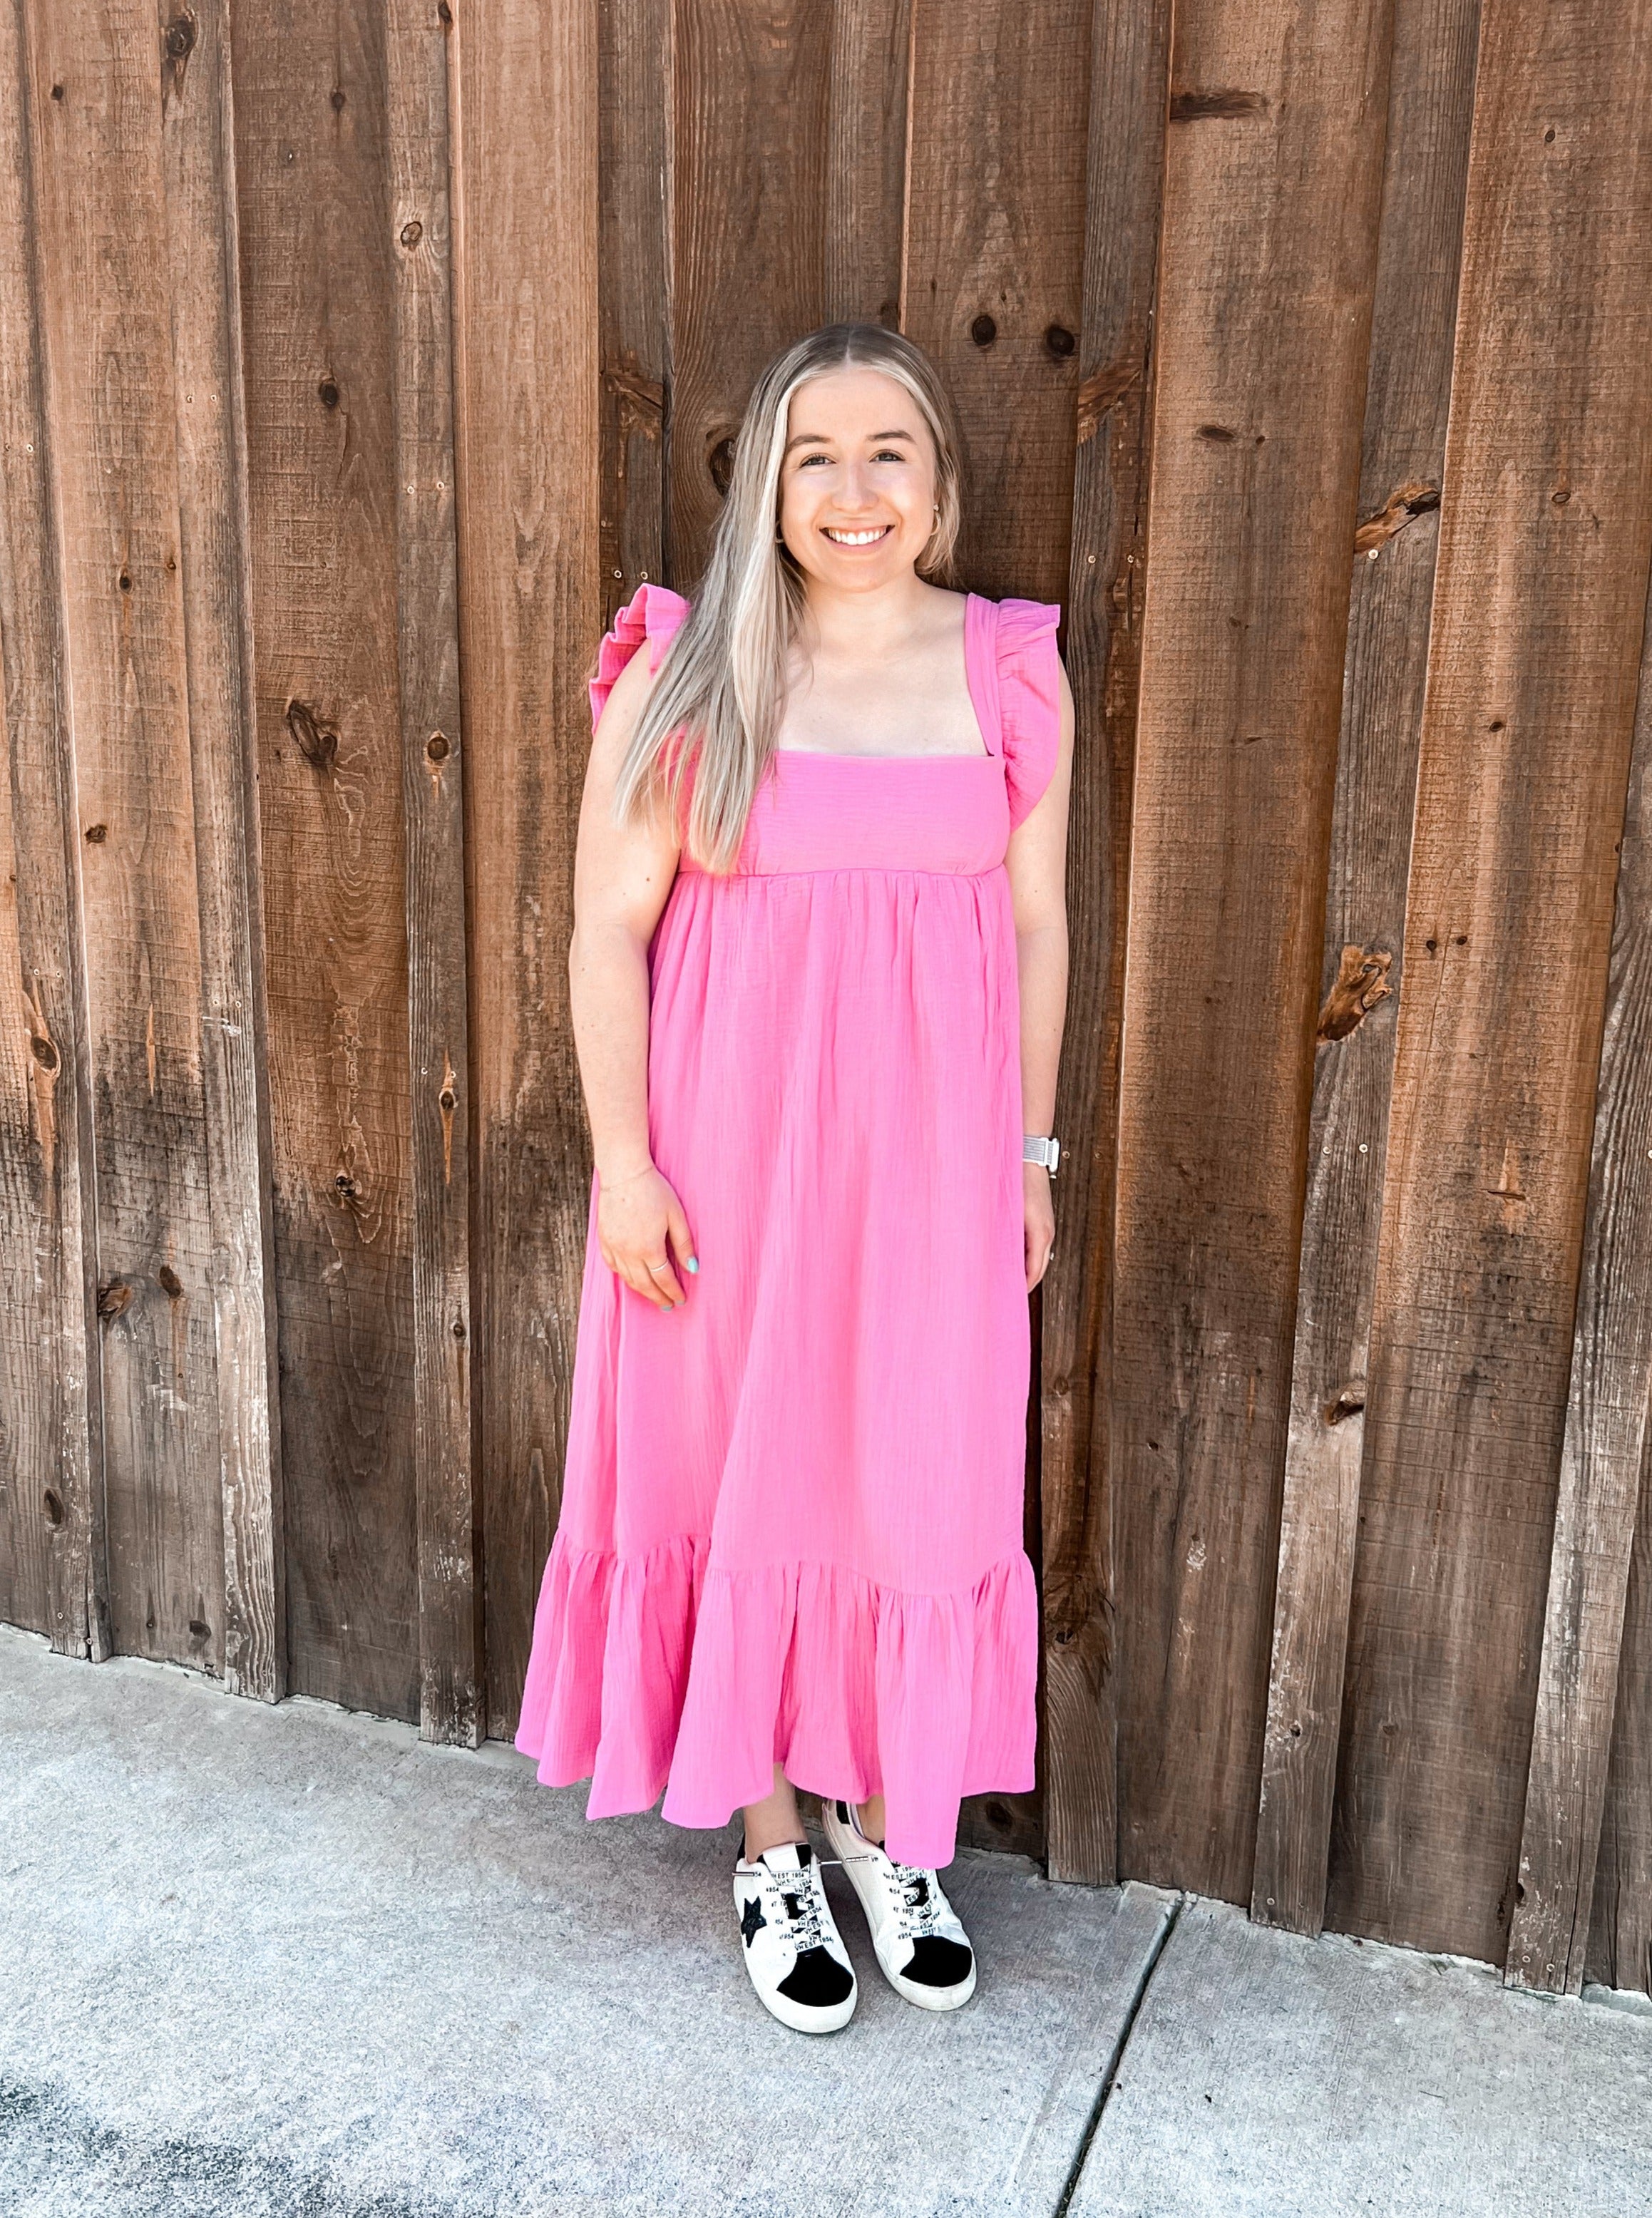 A bright pink maxi dress featuring ruffle cap/tank sleeves and an adjustable tie at the back, combining style with functionality. The dress has a tiered bottom that adds volume and movement to the silhouette, enhancing its playful and elegant appeal. This vibrant dress is perfect for warm-weather occasions, offering a blend of comfort and chic design.